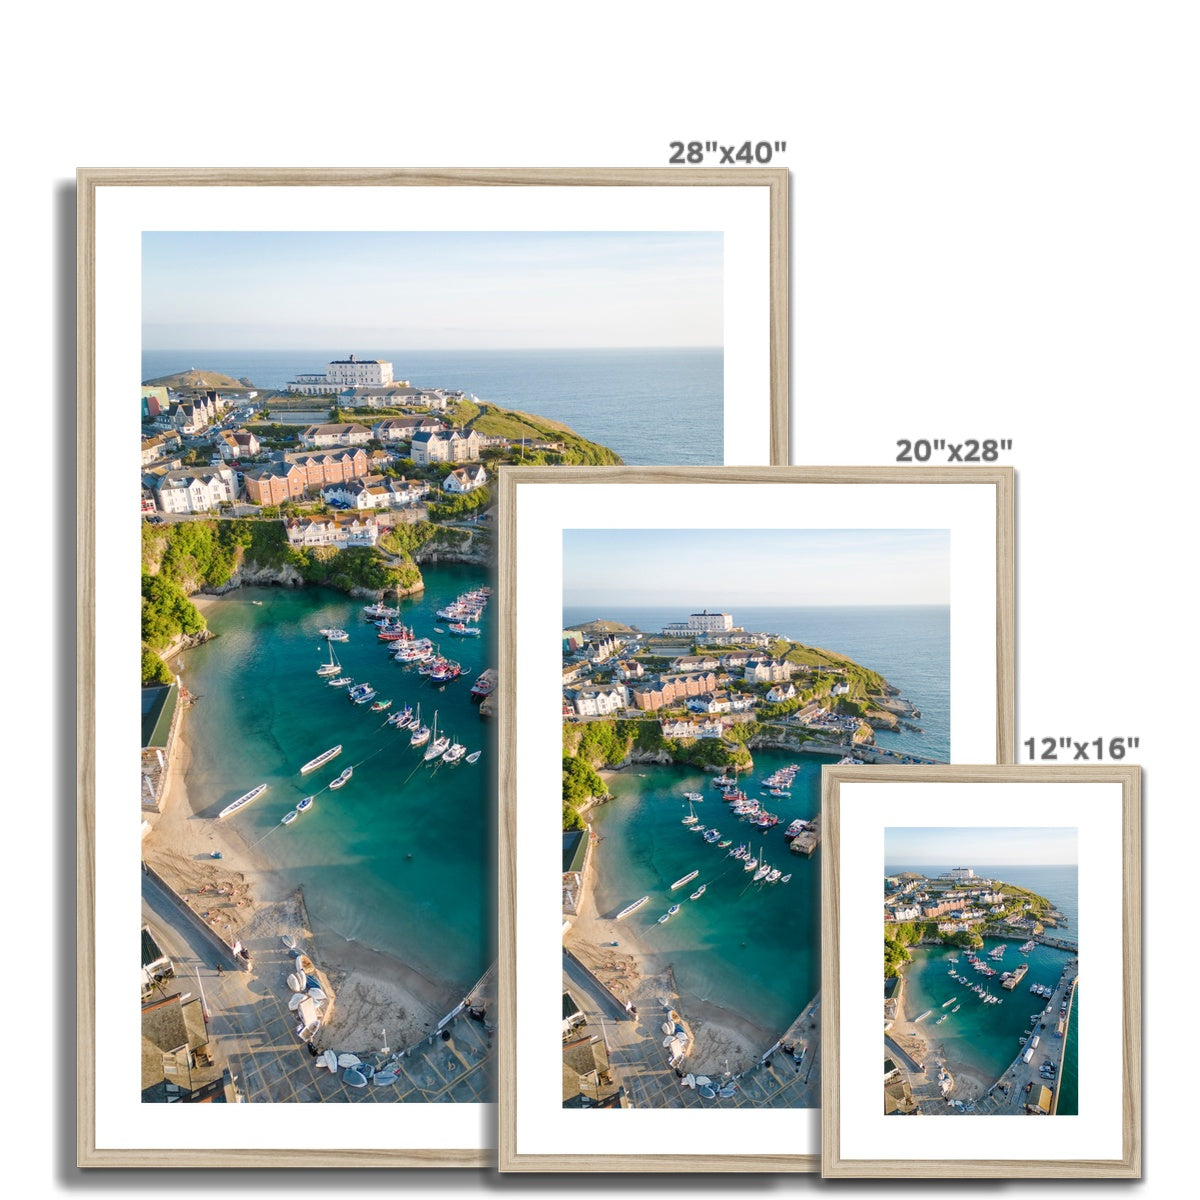 Newquay Harbour Portrait ~ Framed & Mounted Print